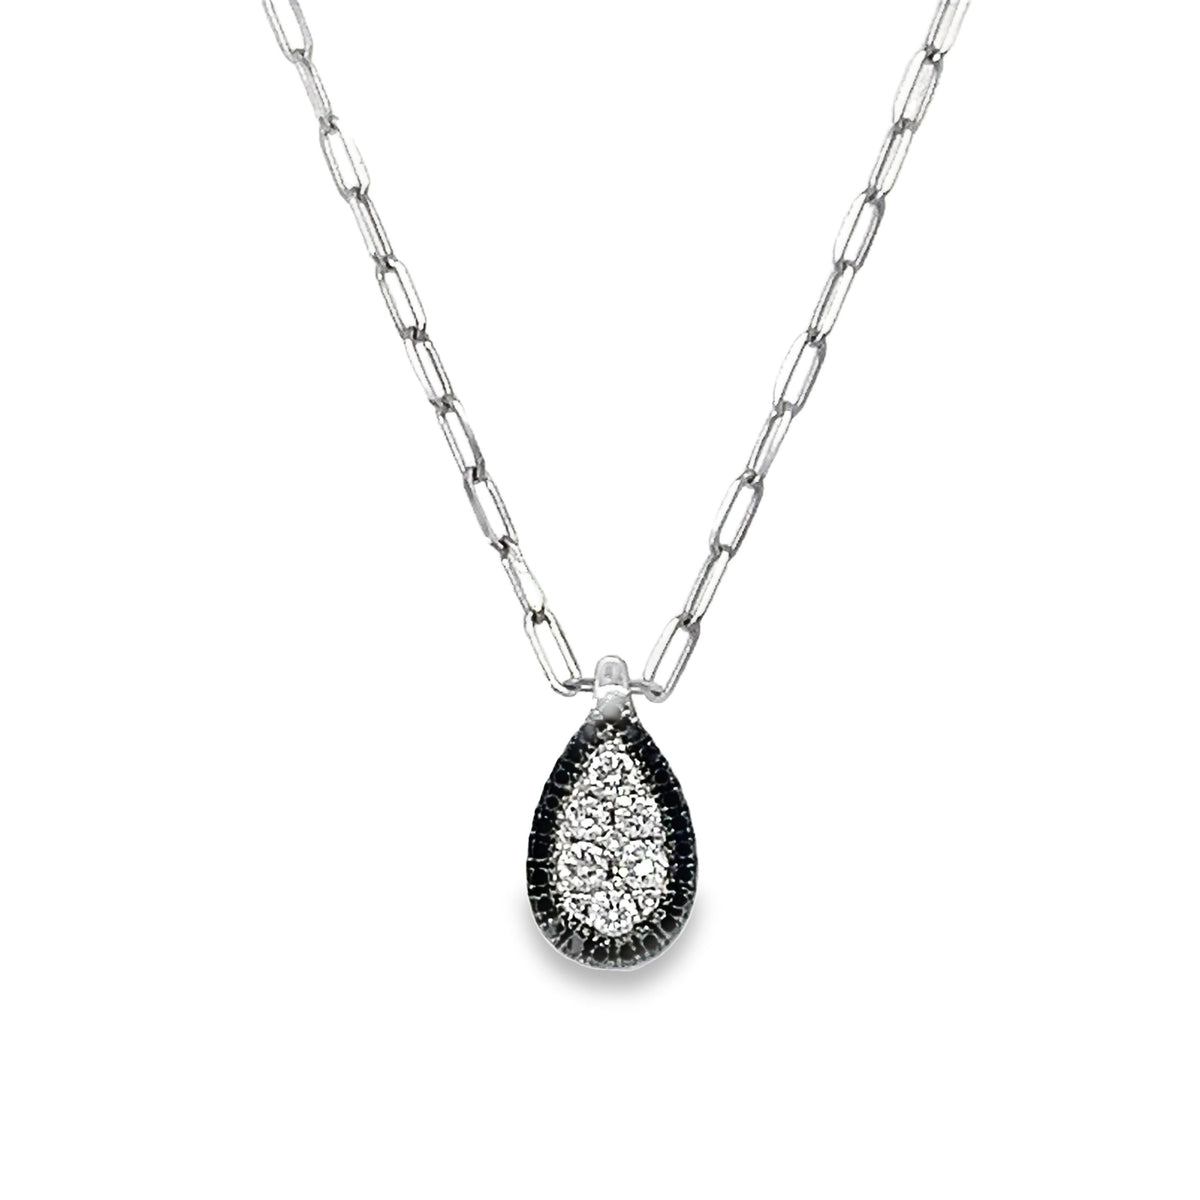 Frederic Sage 14Kt White Gold Pendant with 0.10cttw Natural Diamonds